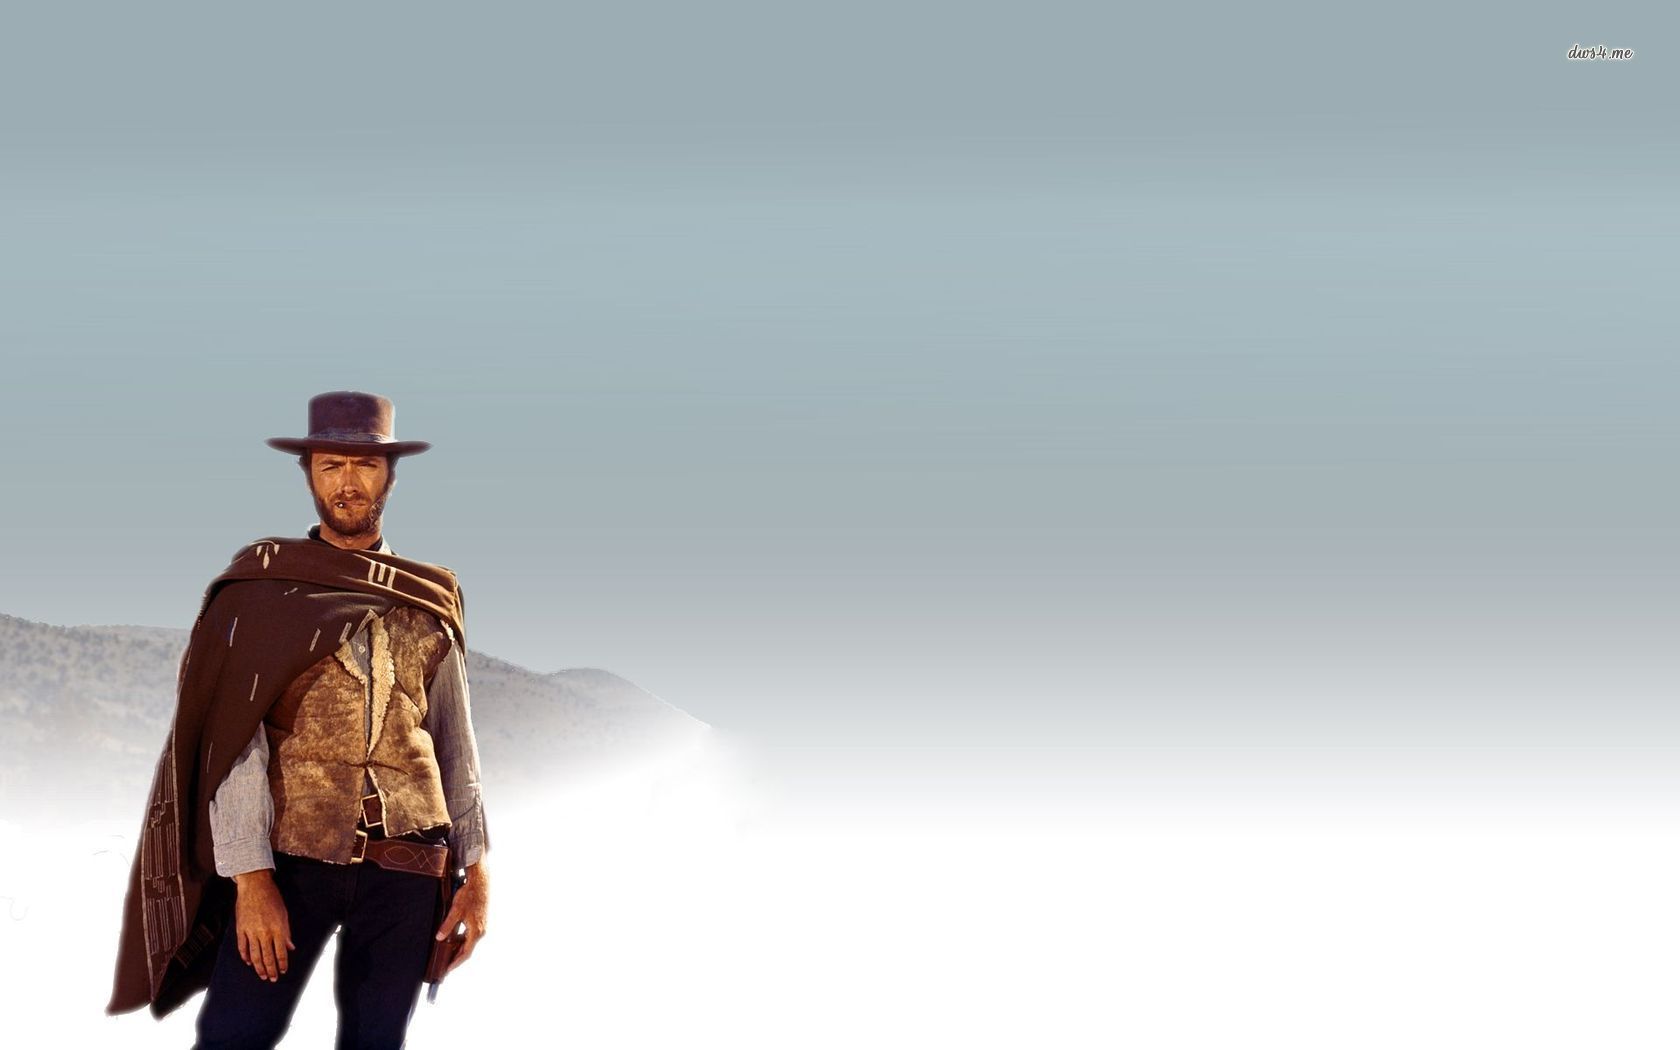 THE GOOD THE BAD AND THE UGLY western clint eastwood rw wallpaper   1920x1080  171652  WallpaperUP